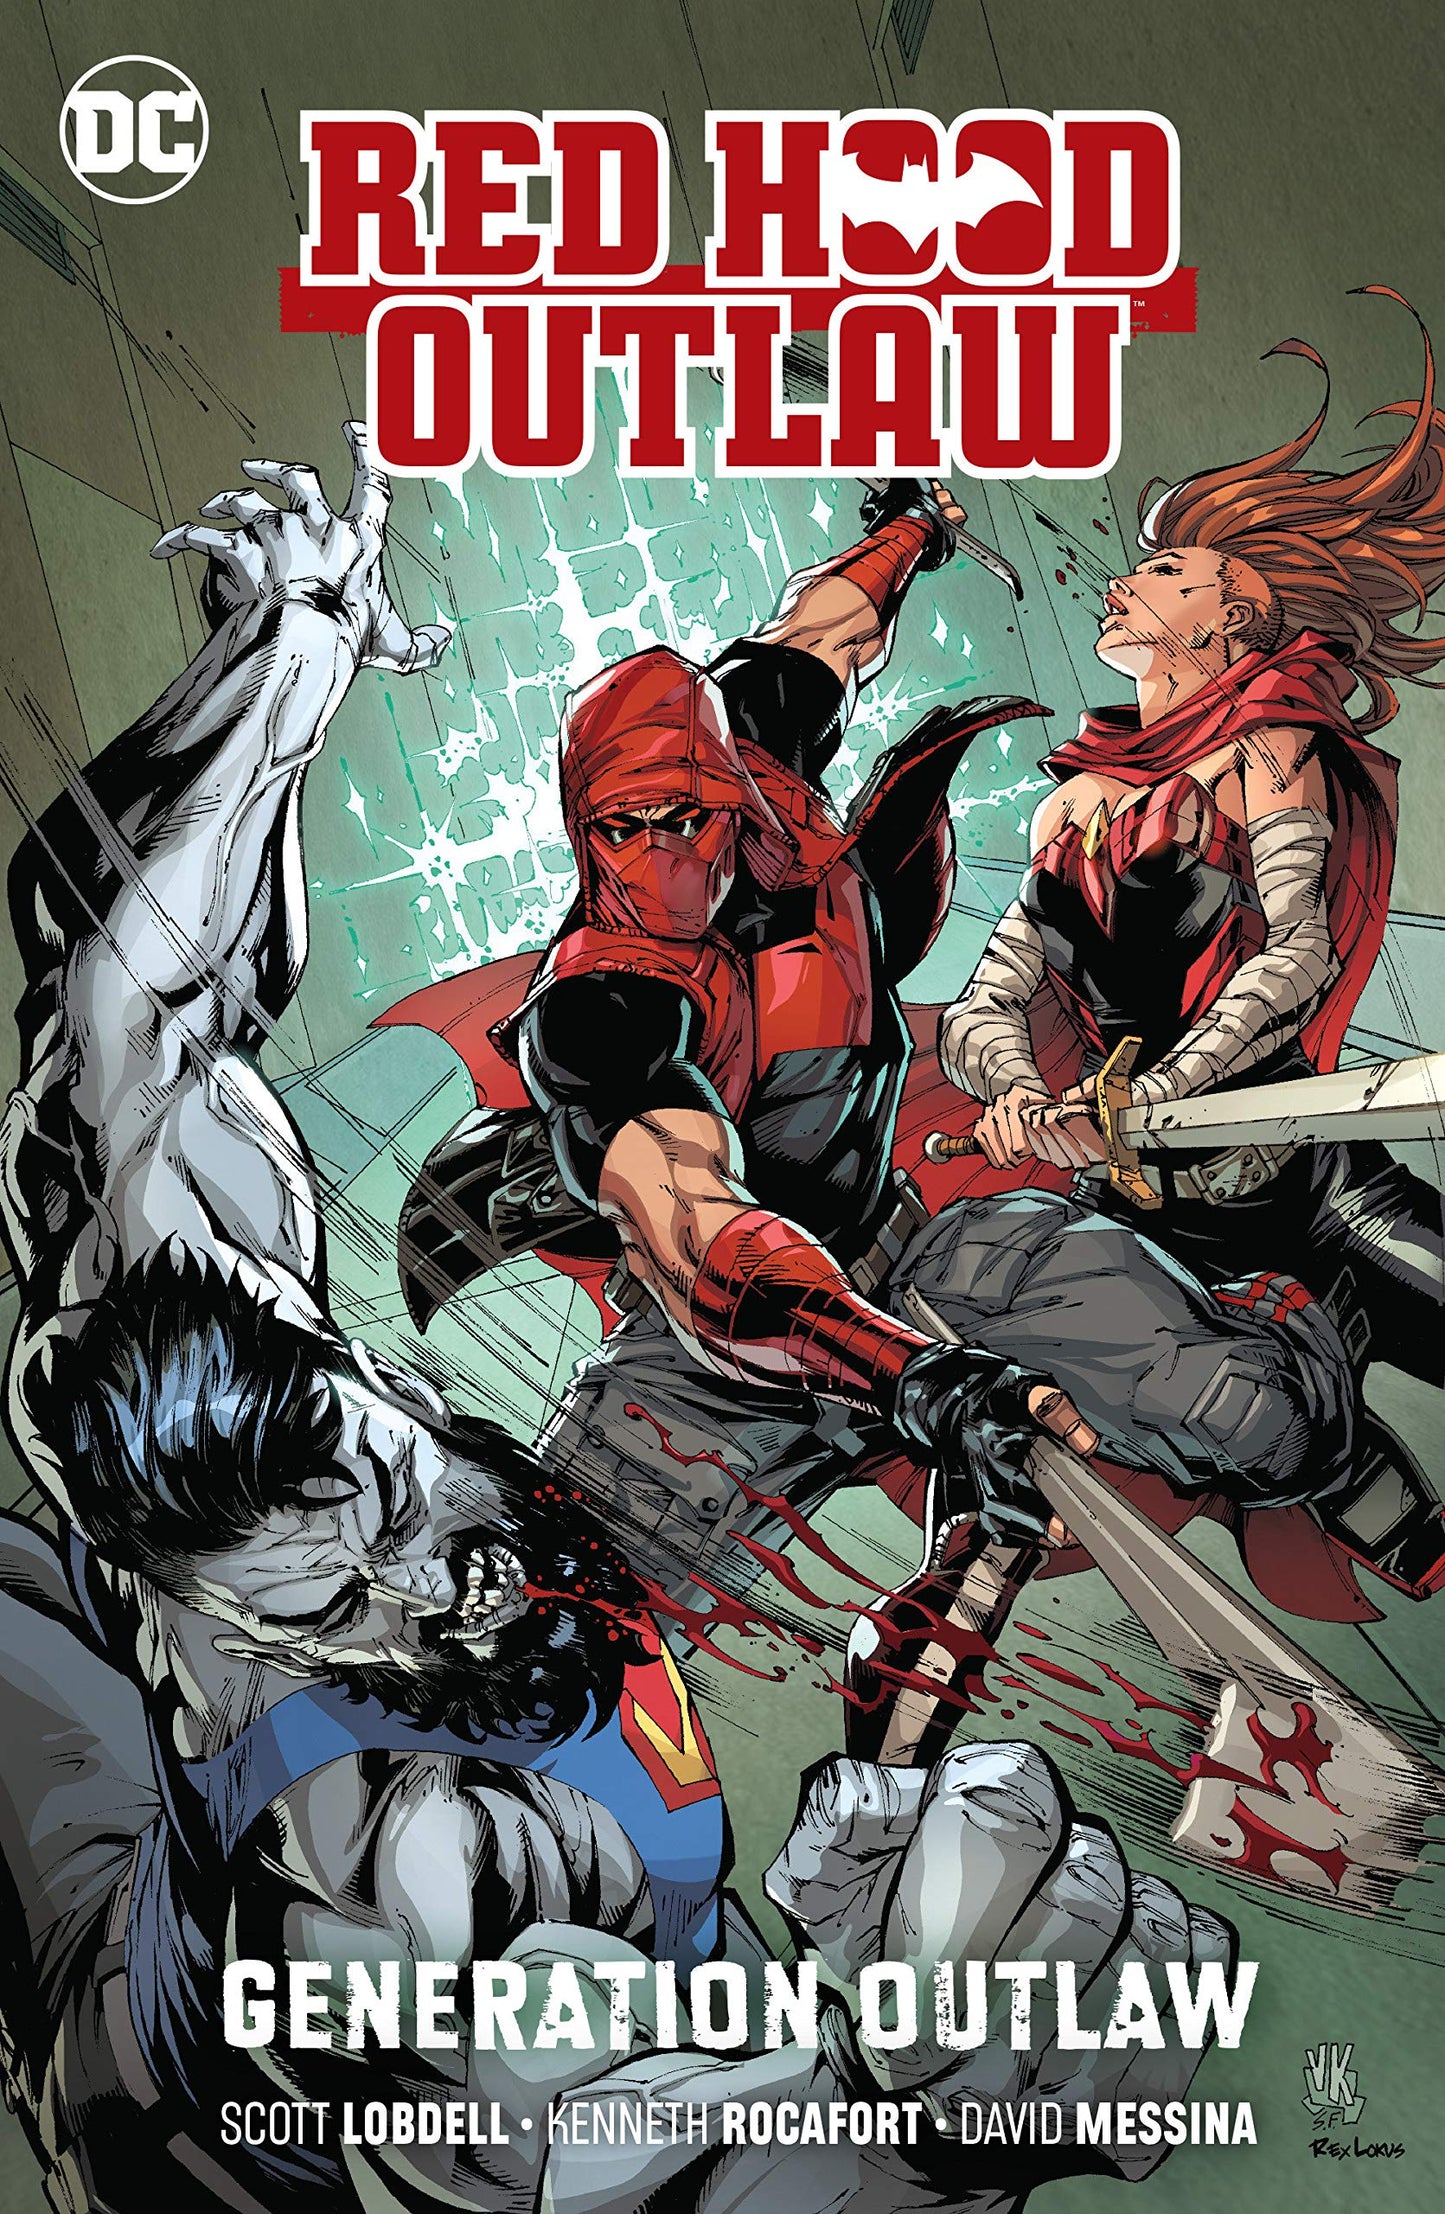 RED HOOD OUTLAW VOL 03: GENERATION OUTLAW